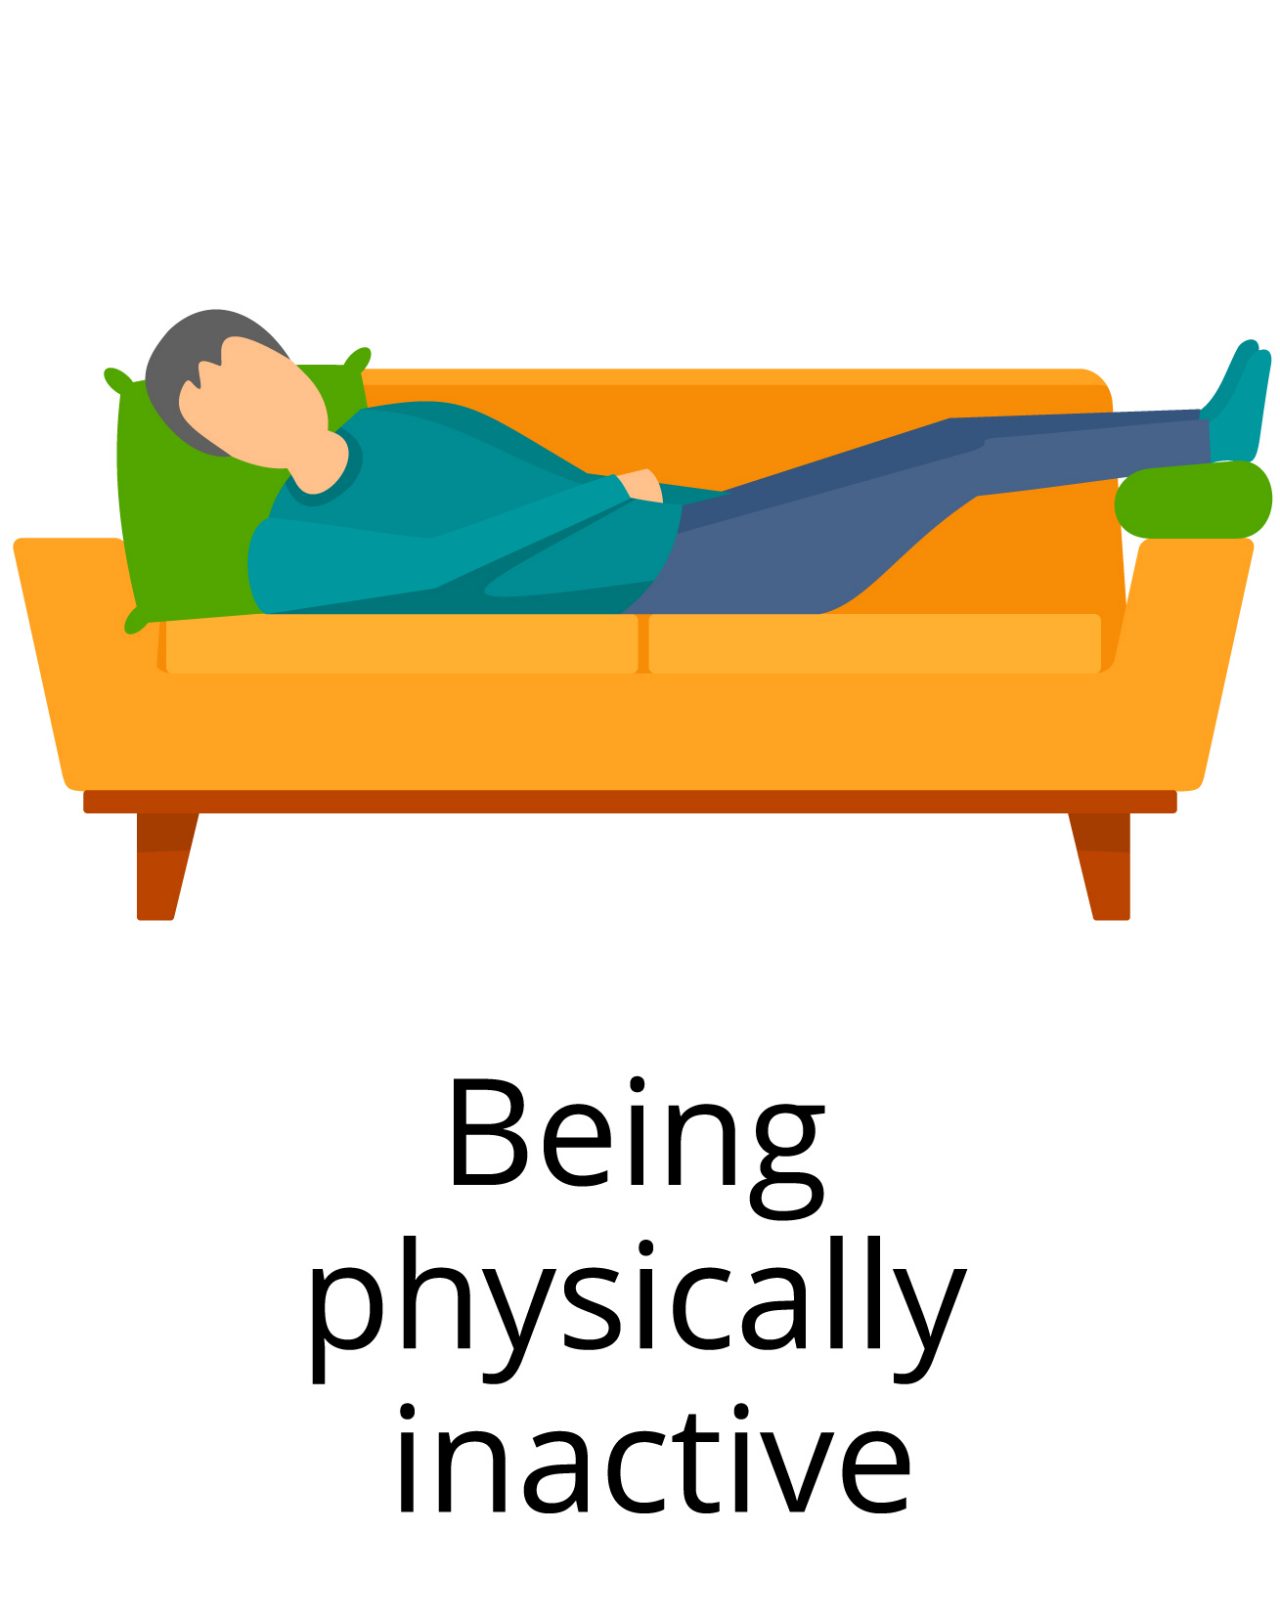 Being physically inactive